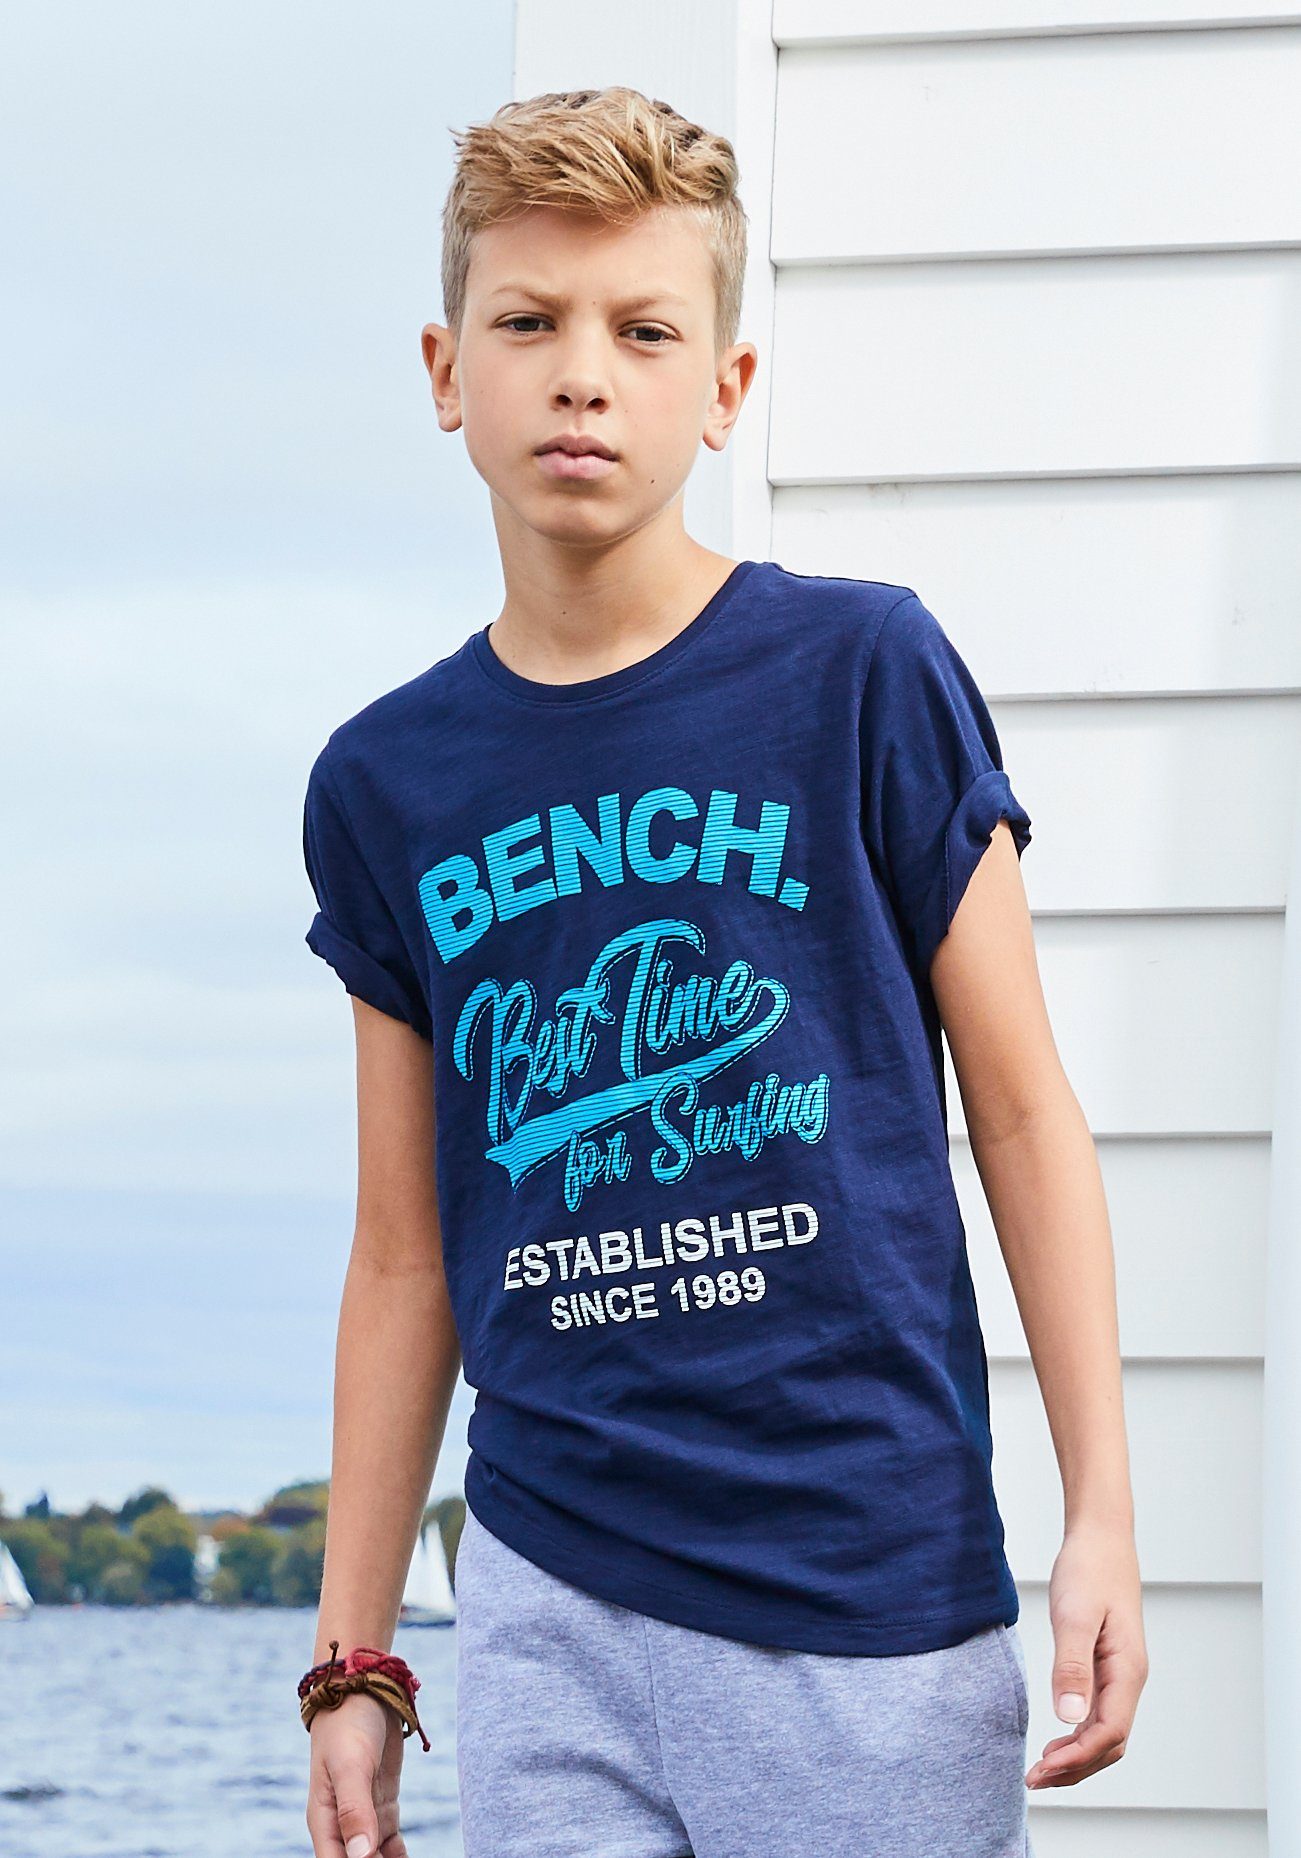 Bench. T-Shirt Best time for surfing | T-Shirts